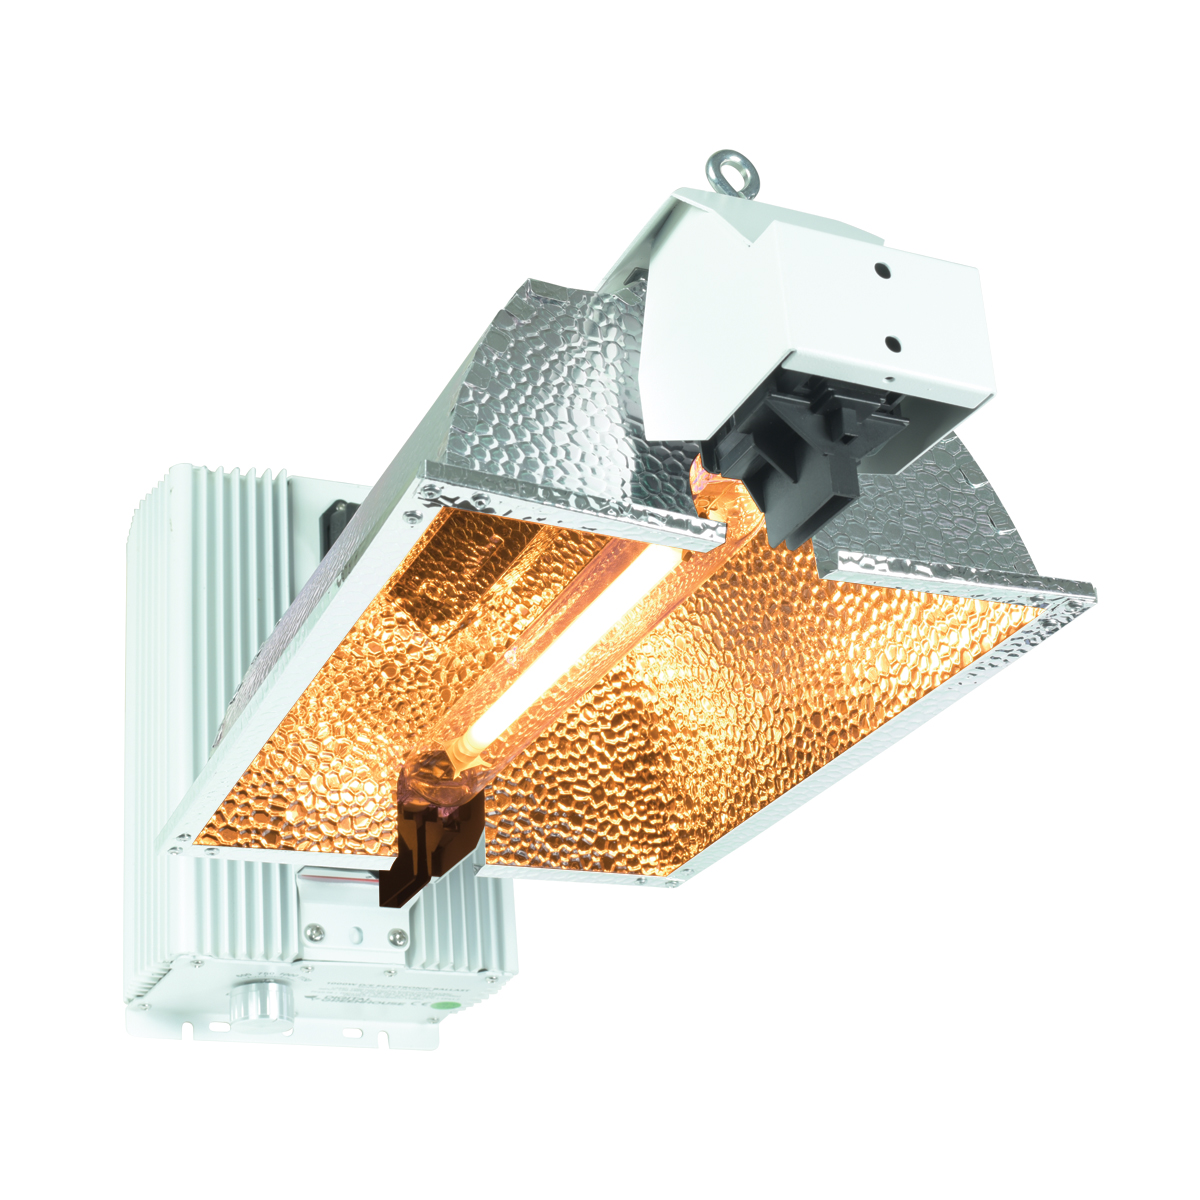 DG-Dimmable-1000W-Grow-Light-with-de-lamp